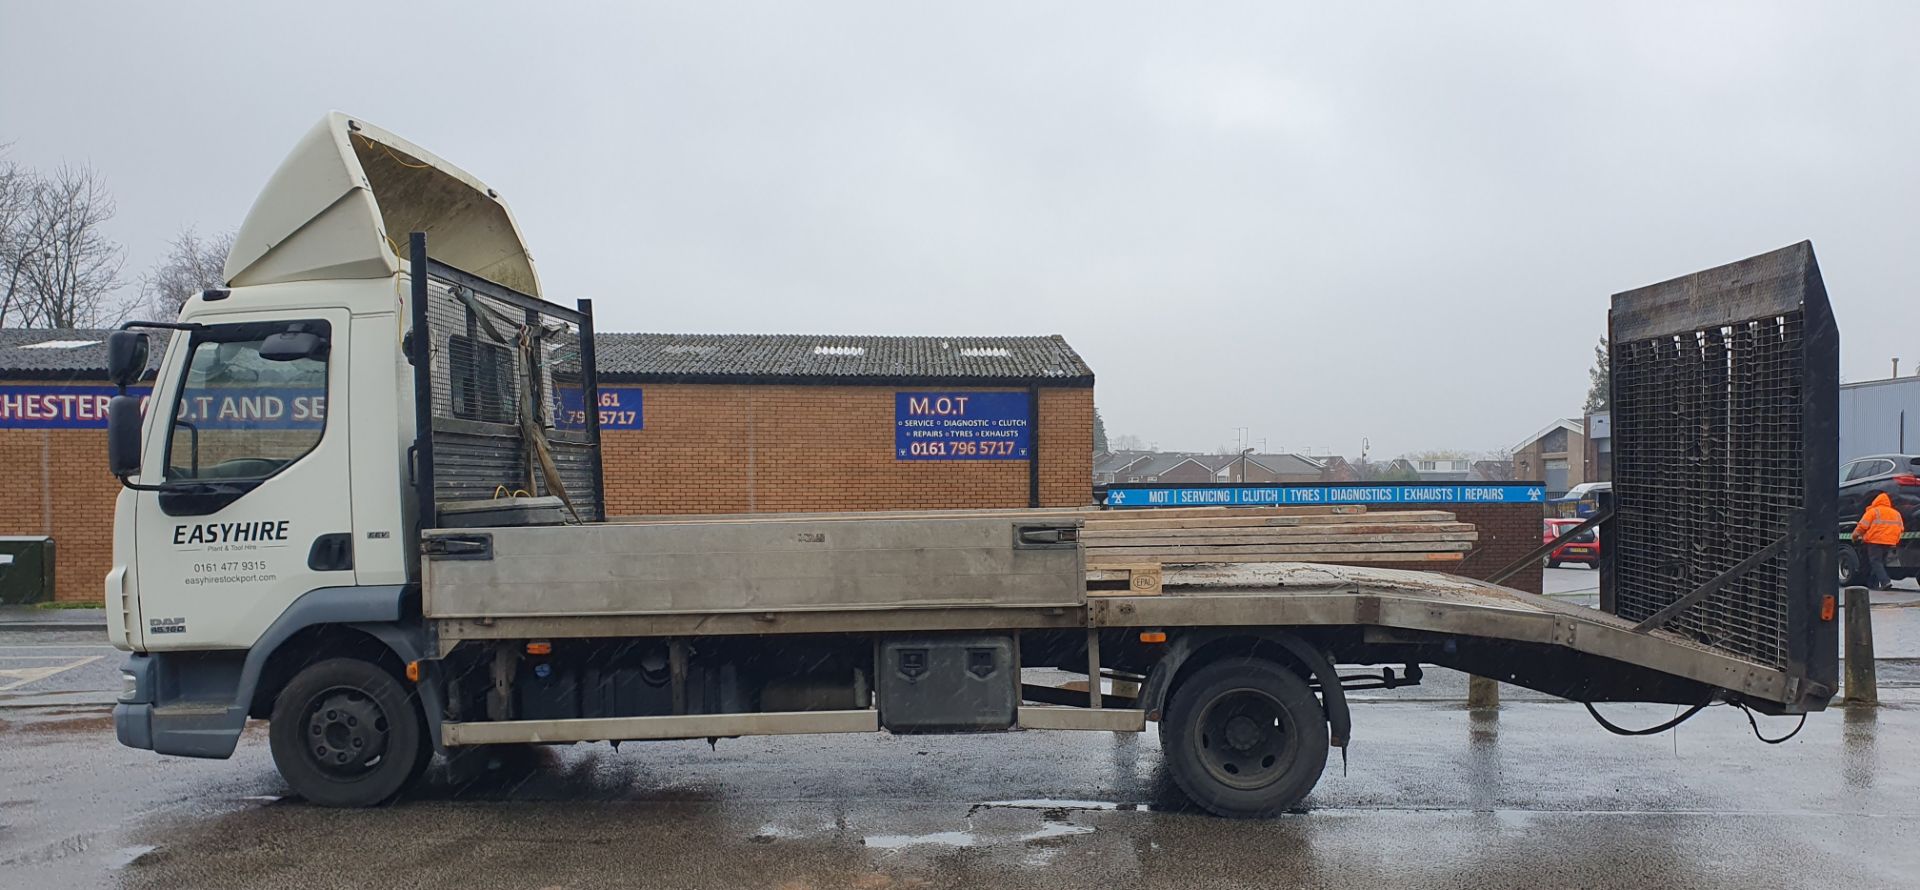 DAF LF 45.160 Flatbed Lorry w/ Loading Ramp & Electric Winch | DIG 4987 | 494,328km - Image 5 of 22